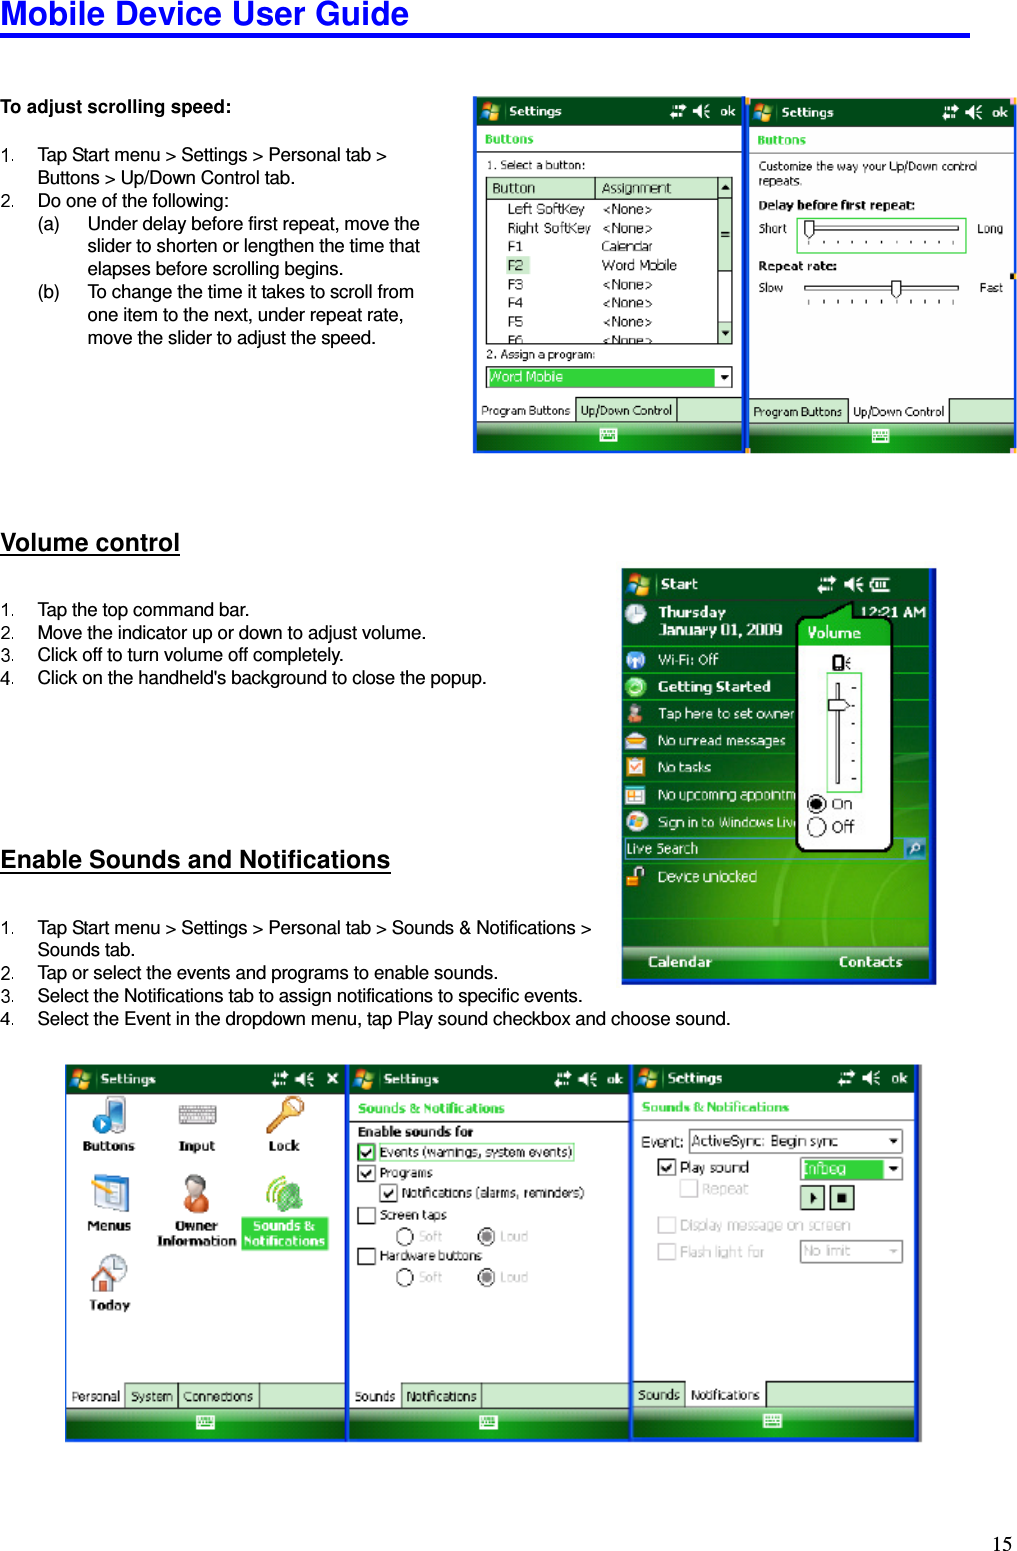 Mobile Device User Guide                                                                                                                                                                                                                                                                                                                                                                                                                                                                                                                                         15  To adjust scrolling speed:    Tap Start menu &gt; Settings &gt; Personal tab &gt; Buttons &gt; Up/Down Control tab.     Do one of the following:   (a)  Under delay before first repeat, move the slider to shorten or lengthen the time that elapses before scrolling begins.   (b)  To change the time it takes to scroll from   one item to the next, under repeat rate,     move the slider to adjust the speed.         Volume control   Tap the top command bar.     Move the indicator up or down to adjust volume.     Click off to turn volume off completely.     Click on the handheld&apos;s background to close the popup.      Enable Sounds and Notifications   Tap Start menu &gt; Settings &gt; Personal tab &gt; Sounds &amp; Notifications &gt;   Sounds tab.     Tap or select the events and programs to enable sounds.     Select the Notifications tab to assign notifications to specific events.     Select the Event in the dropdown menu, tap Play sound checkbox and choose sound.             